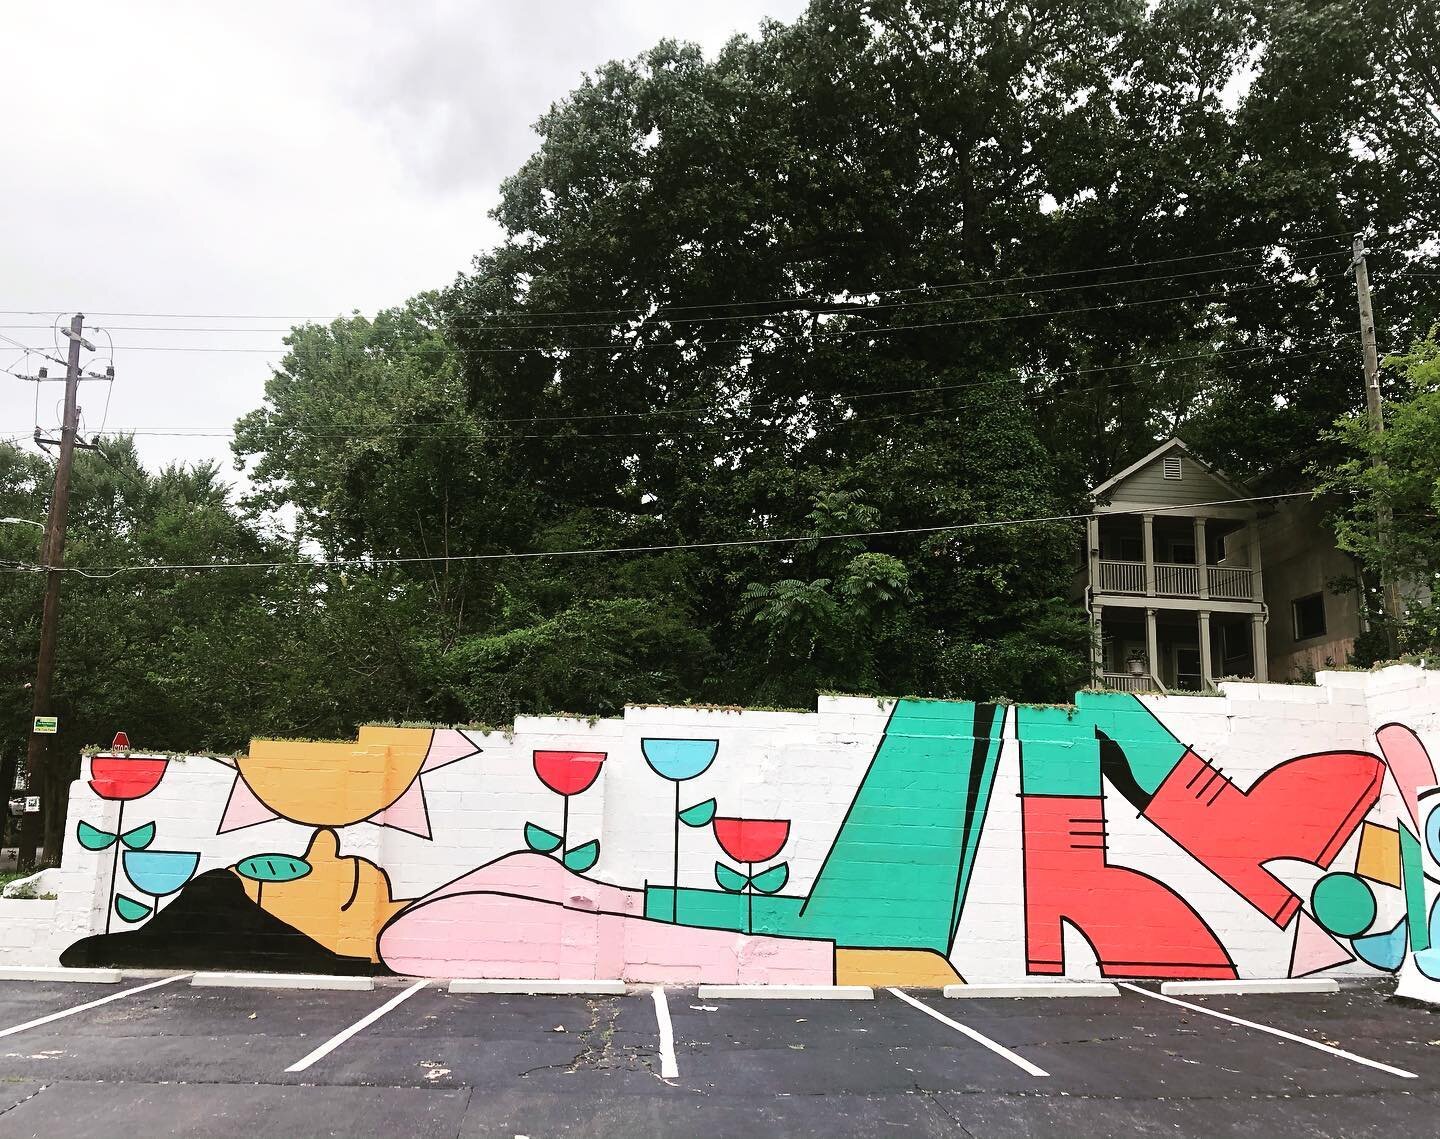 If you&rsquo;re in Summerhill visit @talatmarketatl and check this colorful wall we painted designed by @royfleeman from earlier this year. #thelossprevention